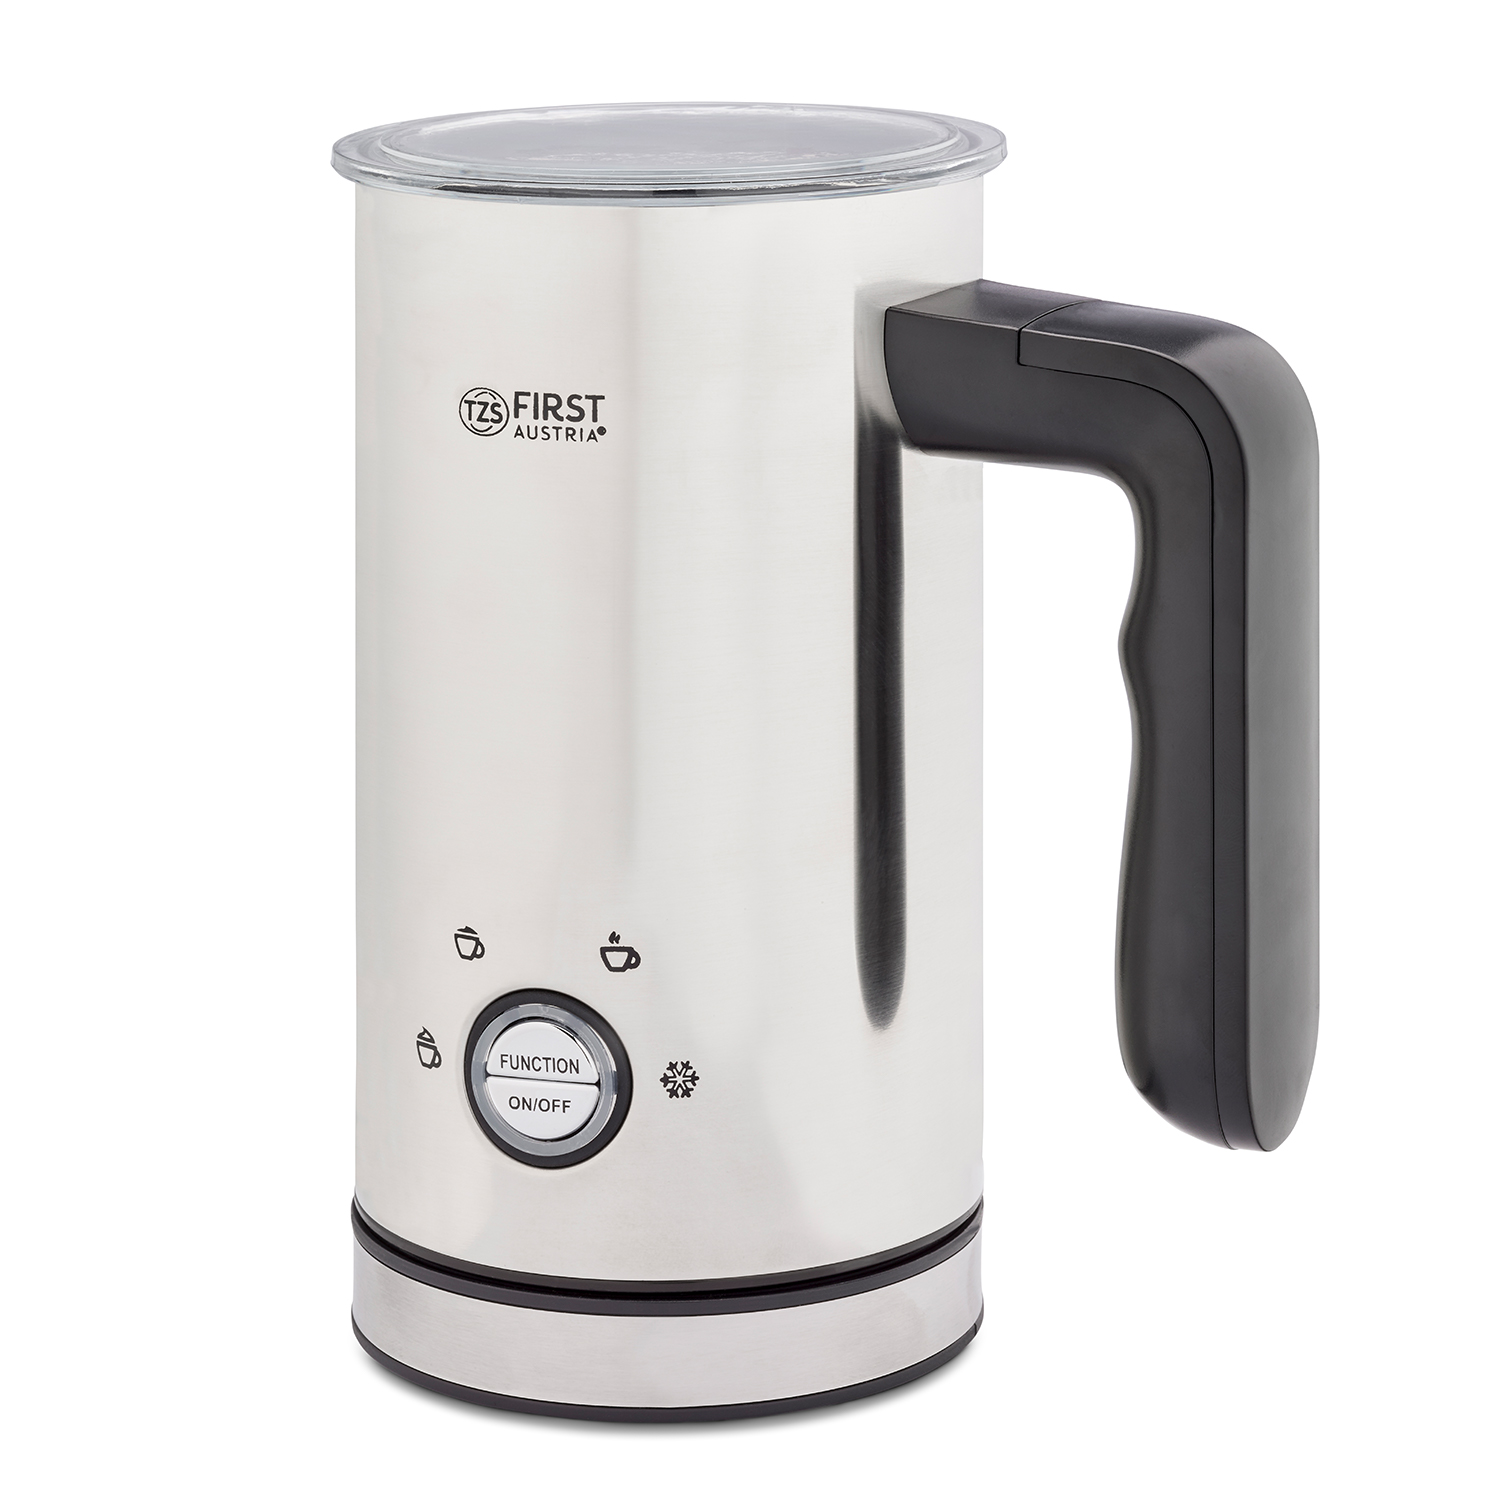 Milk frother | automatic, electric